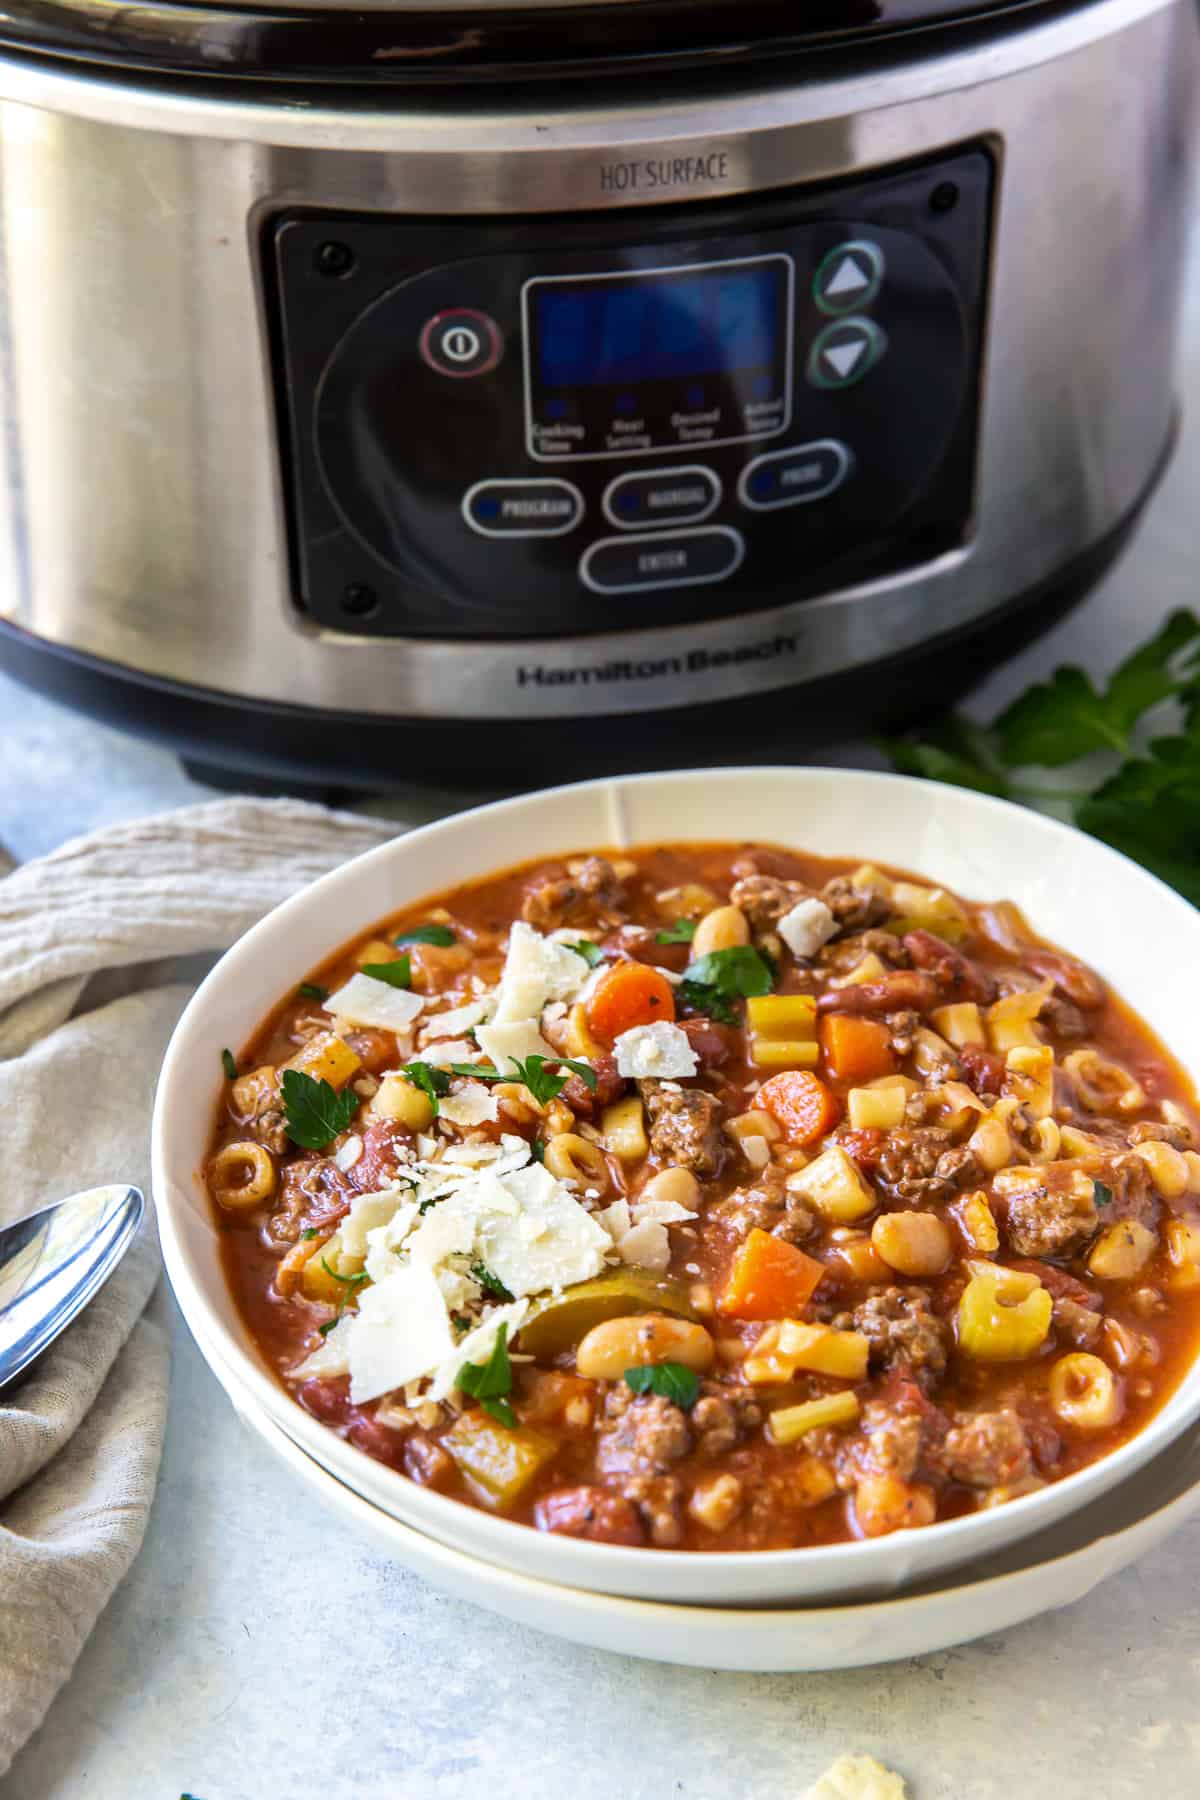 A bowl of minestrone soup in front of a slow cooker.